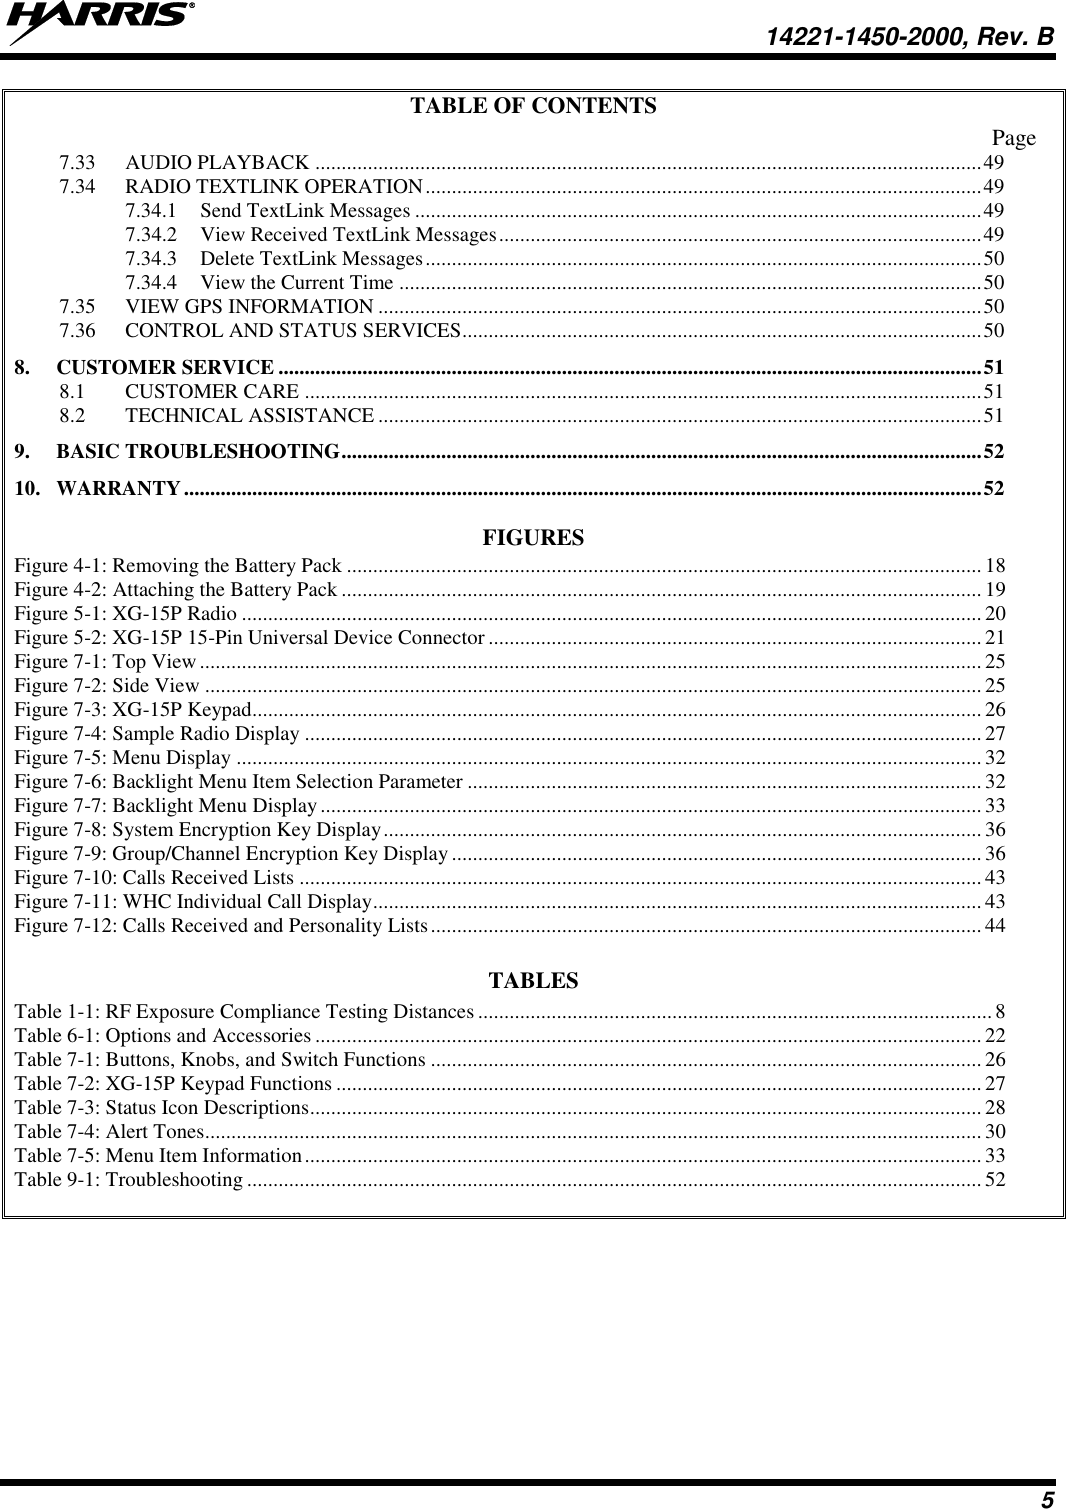   14221-1450-2000, Rev. B 5 TABLE OF CONTENTS Page 7.33 AUDIO PLAYBACK ............................................................................................................................... 49 7.34 RADIO TEXTLINK OPERATION .......................................................................................................... 49 7.34.1 Send TextLink Messages ............................................................................................................ 49 7.34.2 View Received TextLink Messages ............................................................................................ 49 7.34.3 Delete TextLink Messages .......................................................................................................... 50 7.34.4 View the Current Time ............................................................................................................... 50 7.35 VIEW GPS INFORMATION ................................................................................................................... 50 7.36 CONTROL AND STATUS SERVICES ................................................................................................... 50 8. CUSTOMER SERVICE ...................................................................................................................................... 51 8.1 CUSTOMER CARE ................................................................................................................................. 51 8.2 TECHNICAL ASSISTANCE ................................................................................................................... 51 9. BASIC TROUBLESHOOTING .......................................................................................................................... 52 10. WARRANTY ........................................................................................................................................................ 52  FIGURES Figure 4-1: Removing the Battery Pack ......................................................................................................................... 18 Figure 4-2: Attaching the Battery Pack .......................................................................................................................... 19 Figure 5-1: XG-15P Radio ............................................................................................................................................. 20 Figure 5-2: XG-15P 15-Pin Universal Device Connector .............................................................................................. 21 Figure 7-1: Top View ..................................................................................................................................................... 25 Figure 7-2: Side View .................................................................................................................................................... 25 Figure 7-3: XG-15P Keypad........................................................................................................................................... 26 Figure 7-4: Sample Radio Display ................................................................................................................................. 27 Figure 7-5: Menu Display .............................................................................................................................................. 32 Figure 7-6: Backlight Menu Item Selection Parameter .................................................................................................. 32 Figure 7-7: Backlight Menu Display .............................................................................................................................. 33 Figure 7-8: System Encryption Key Display .................................................................................................................. 36 Figure 7-9: Group/Channel Encryption Key Display ..................................................................................................... 36 Figure 7-10: Calls Received Lists .................................................................................................................................. 43 Figure 7-11: WHC Individual Call Display .................................................................................................................... 43 Figure 7-12: Calls Received and Personality Lists ......................................................................................................... 44  TABLES Table 1-1: RF Exposure Compliance Testing Distances .................................................................................................. 8 Table 6-1: Options and Accessories ............................................................................................................................... 22 Table 7-1: Buttons, Knobs, and Switch Functions ......................................................................................................... 26 Table 7-2: XG-15P Keypad Functions ........................................................................................................................... 27 Table 7-3: Status Icon Descriptions ................................................................................................................................ 28 Table 7-4: Alert Tones .................................................................................................................................................... 30 Table 7-5: Menu Item Information ................................................................................................................................. 33 Table 9-1: Troubleshooting ............................................................................................................................................ 52   